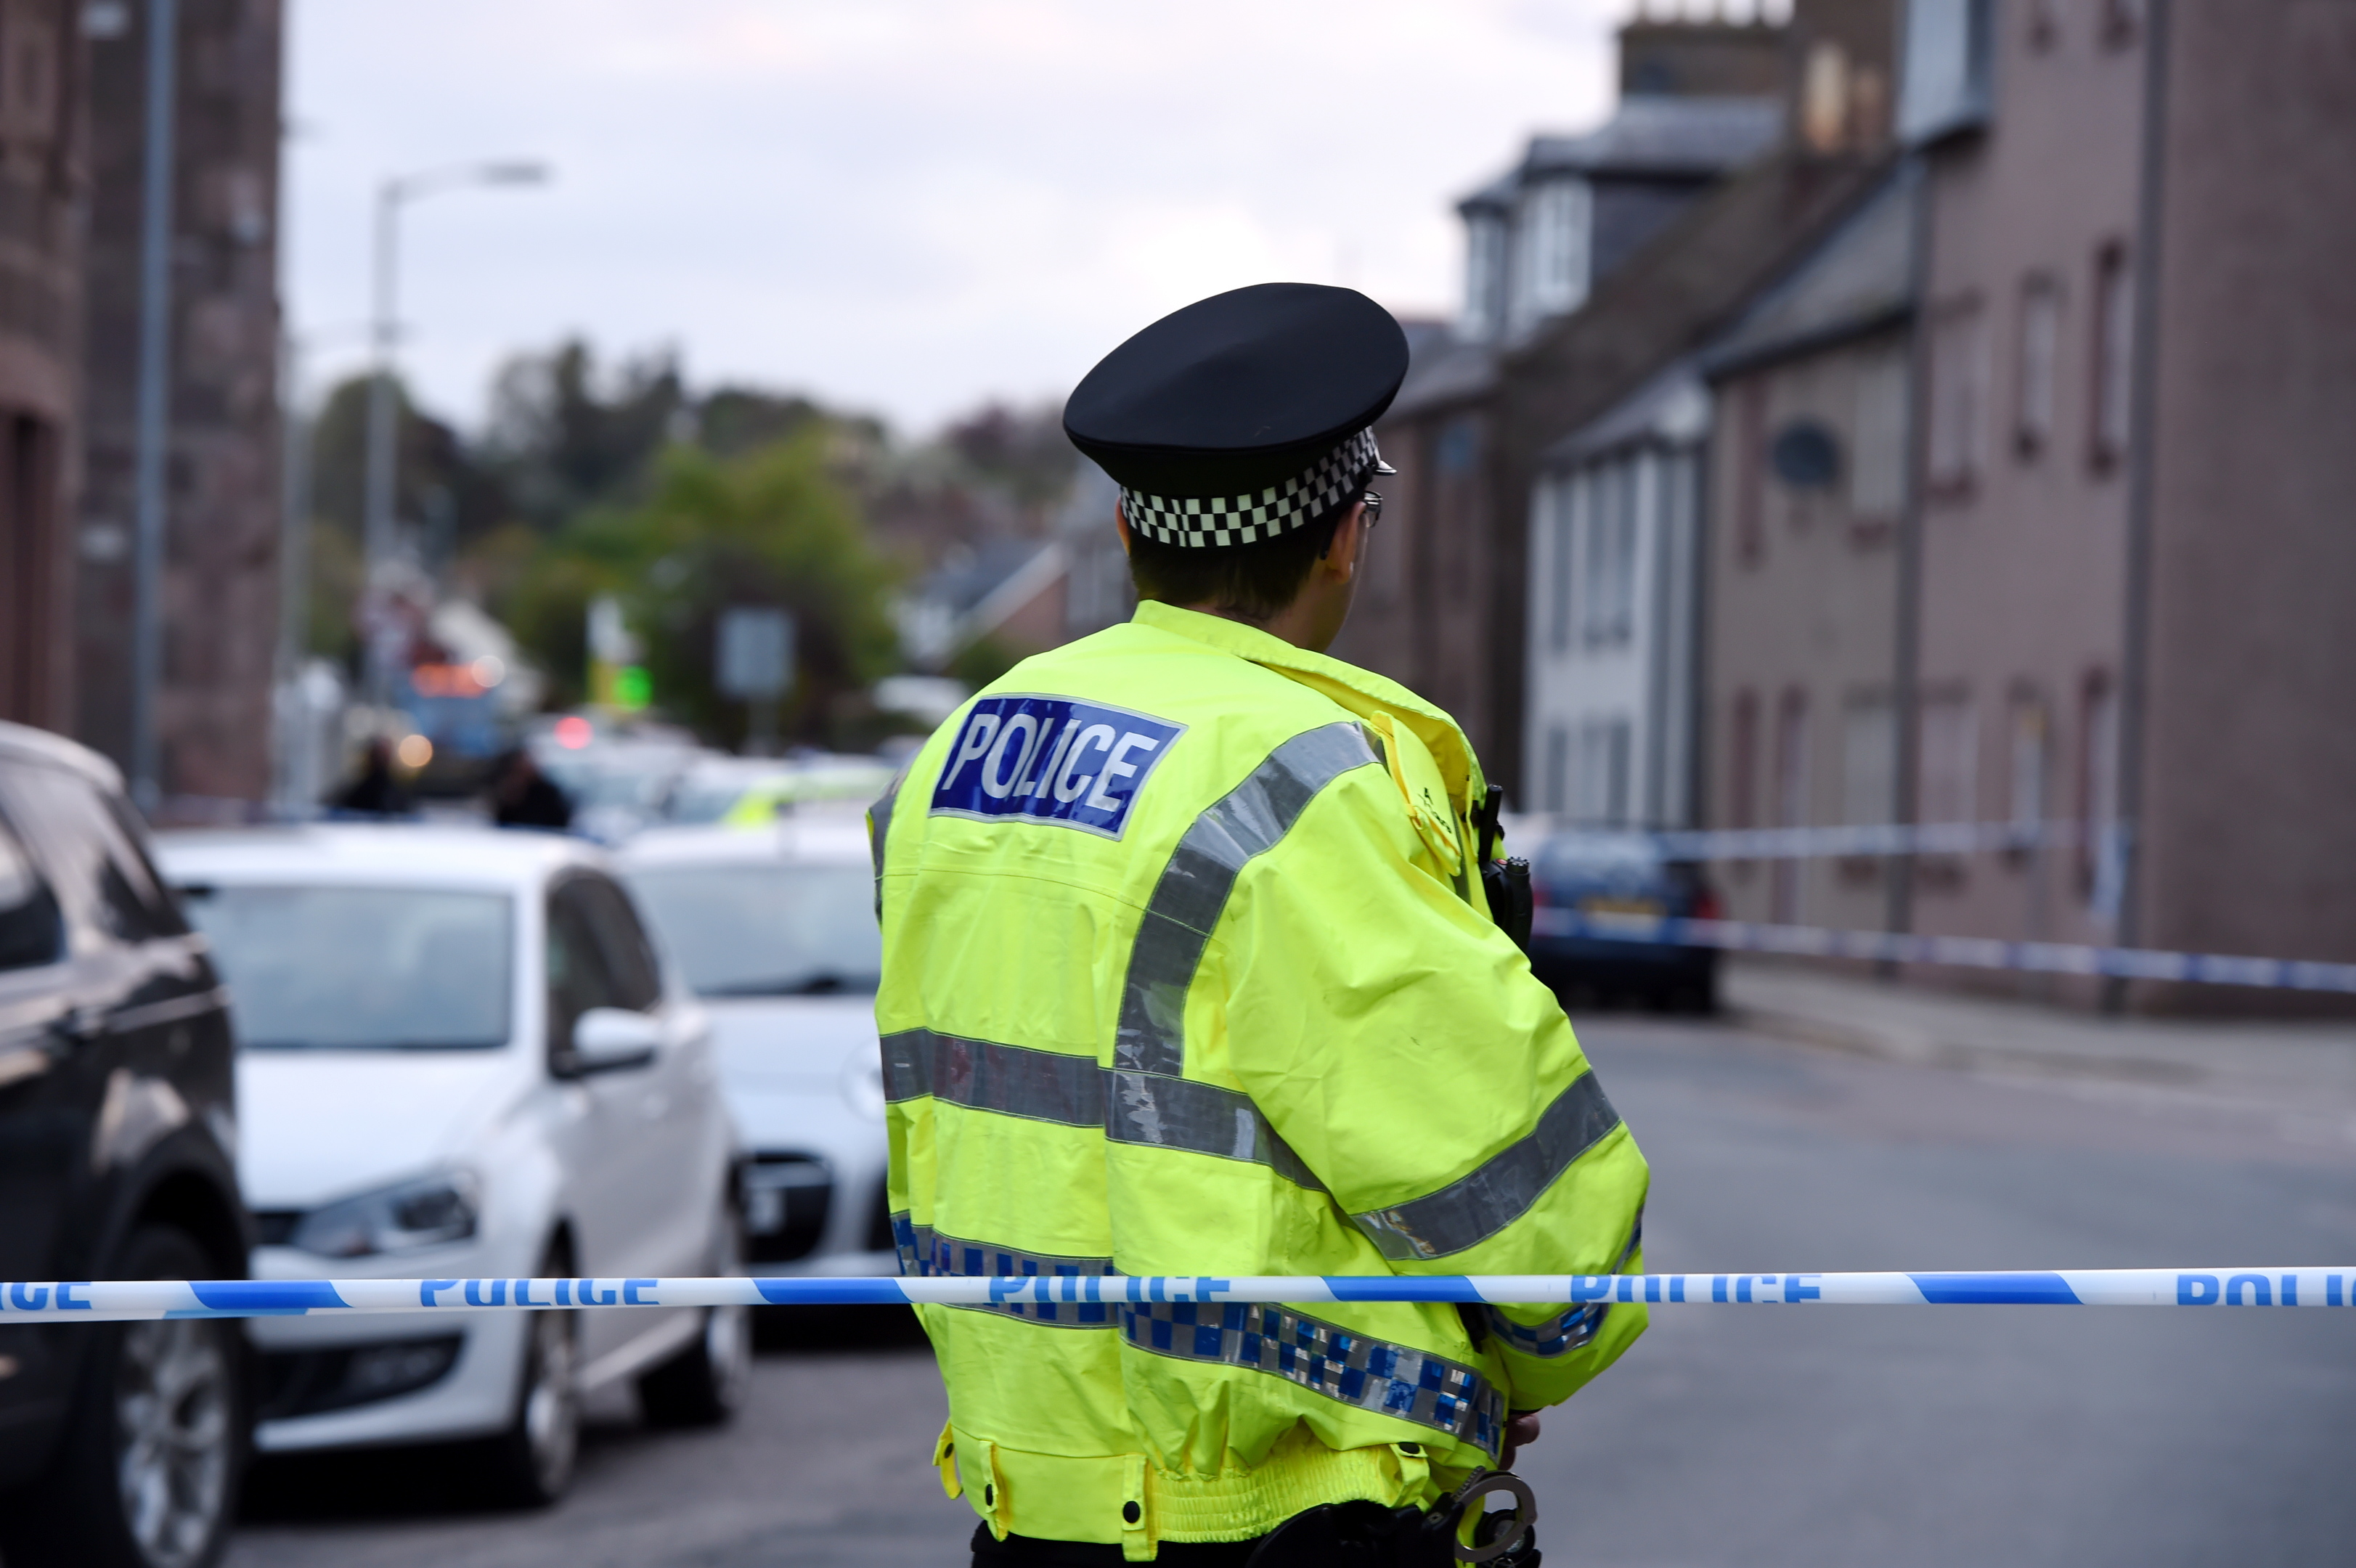 Police on the scene of an incident on High Street in Stonehaven.